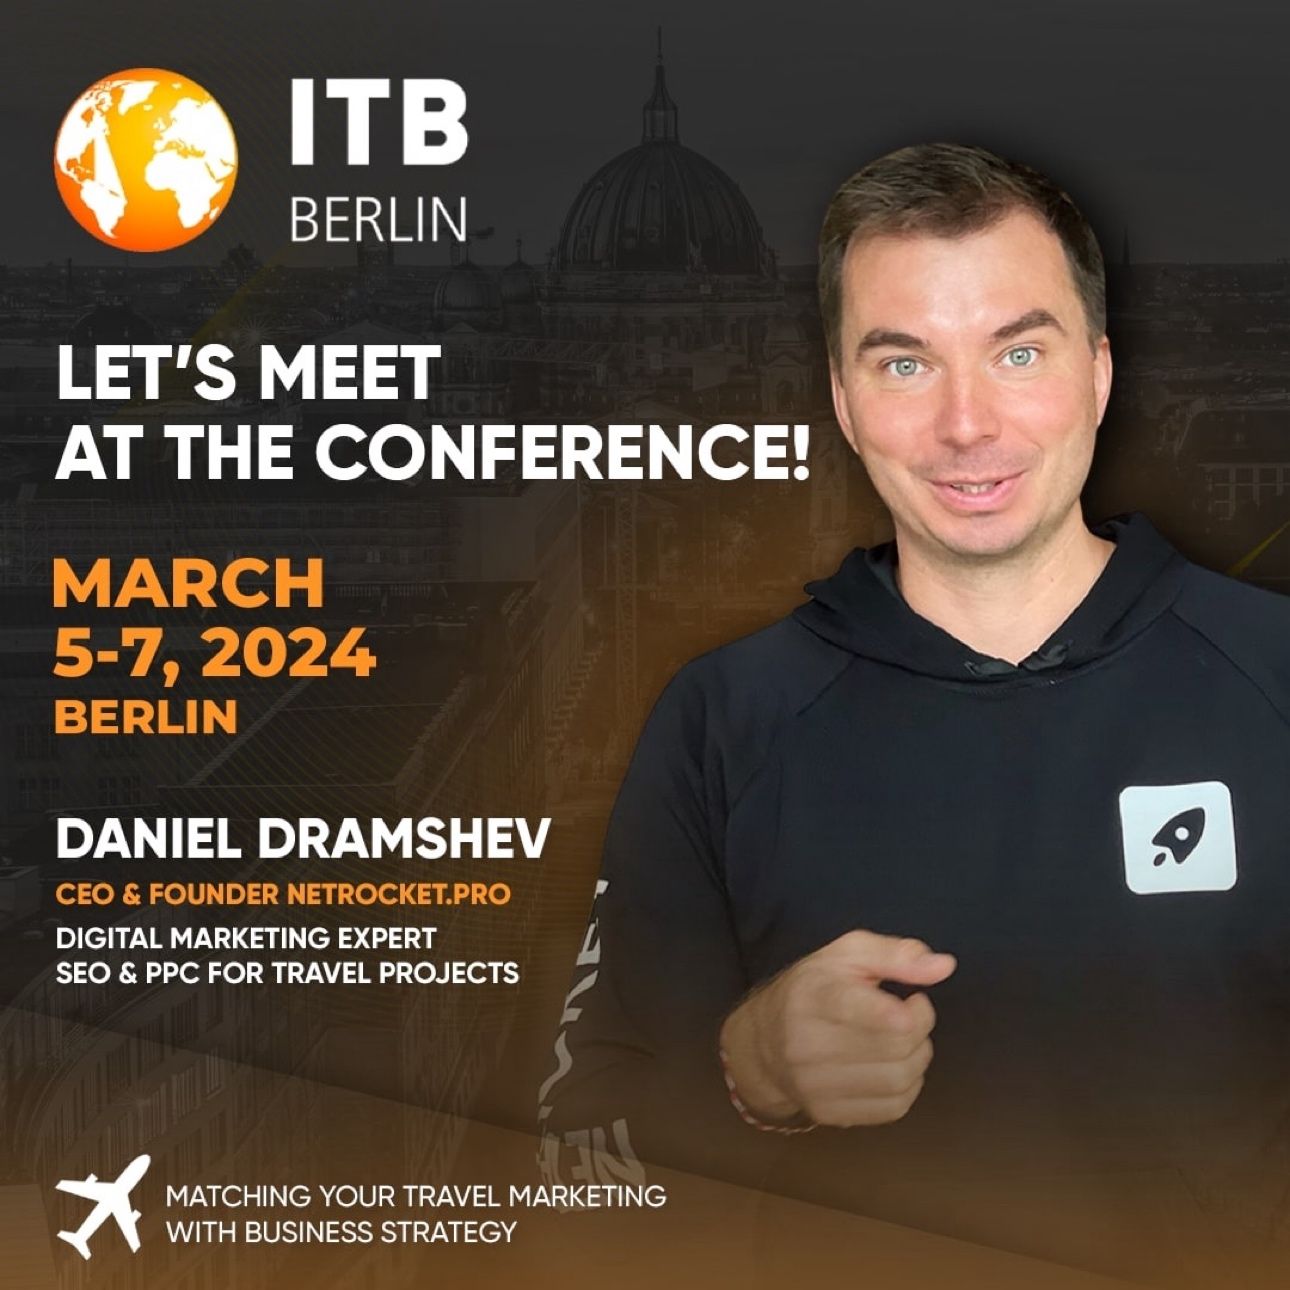 Are you coming to ITB Berlin this year?